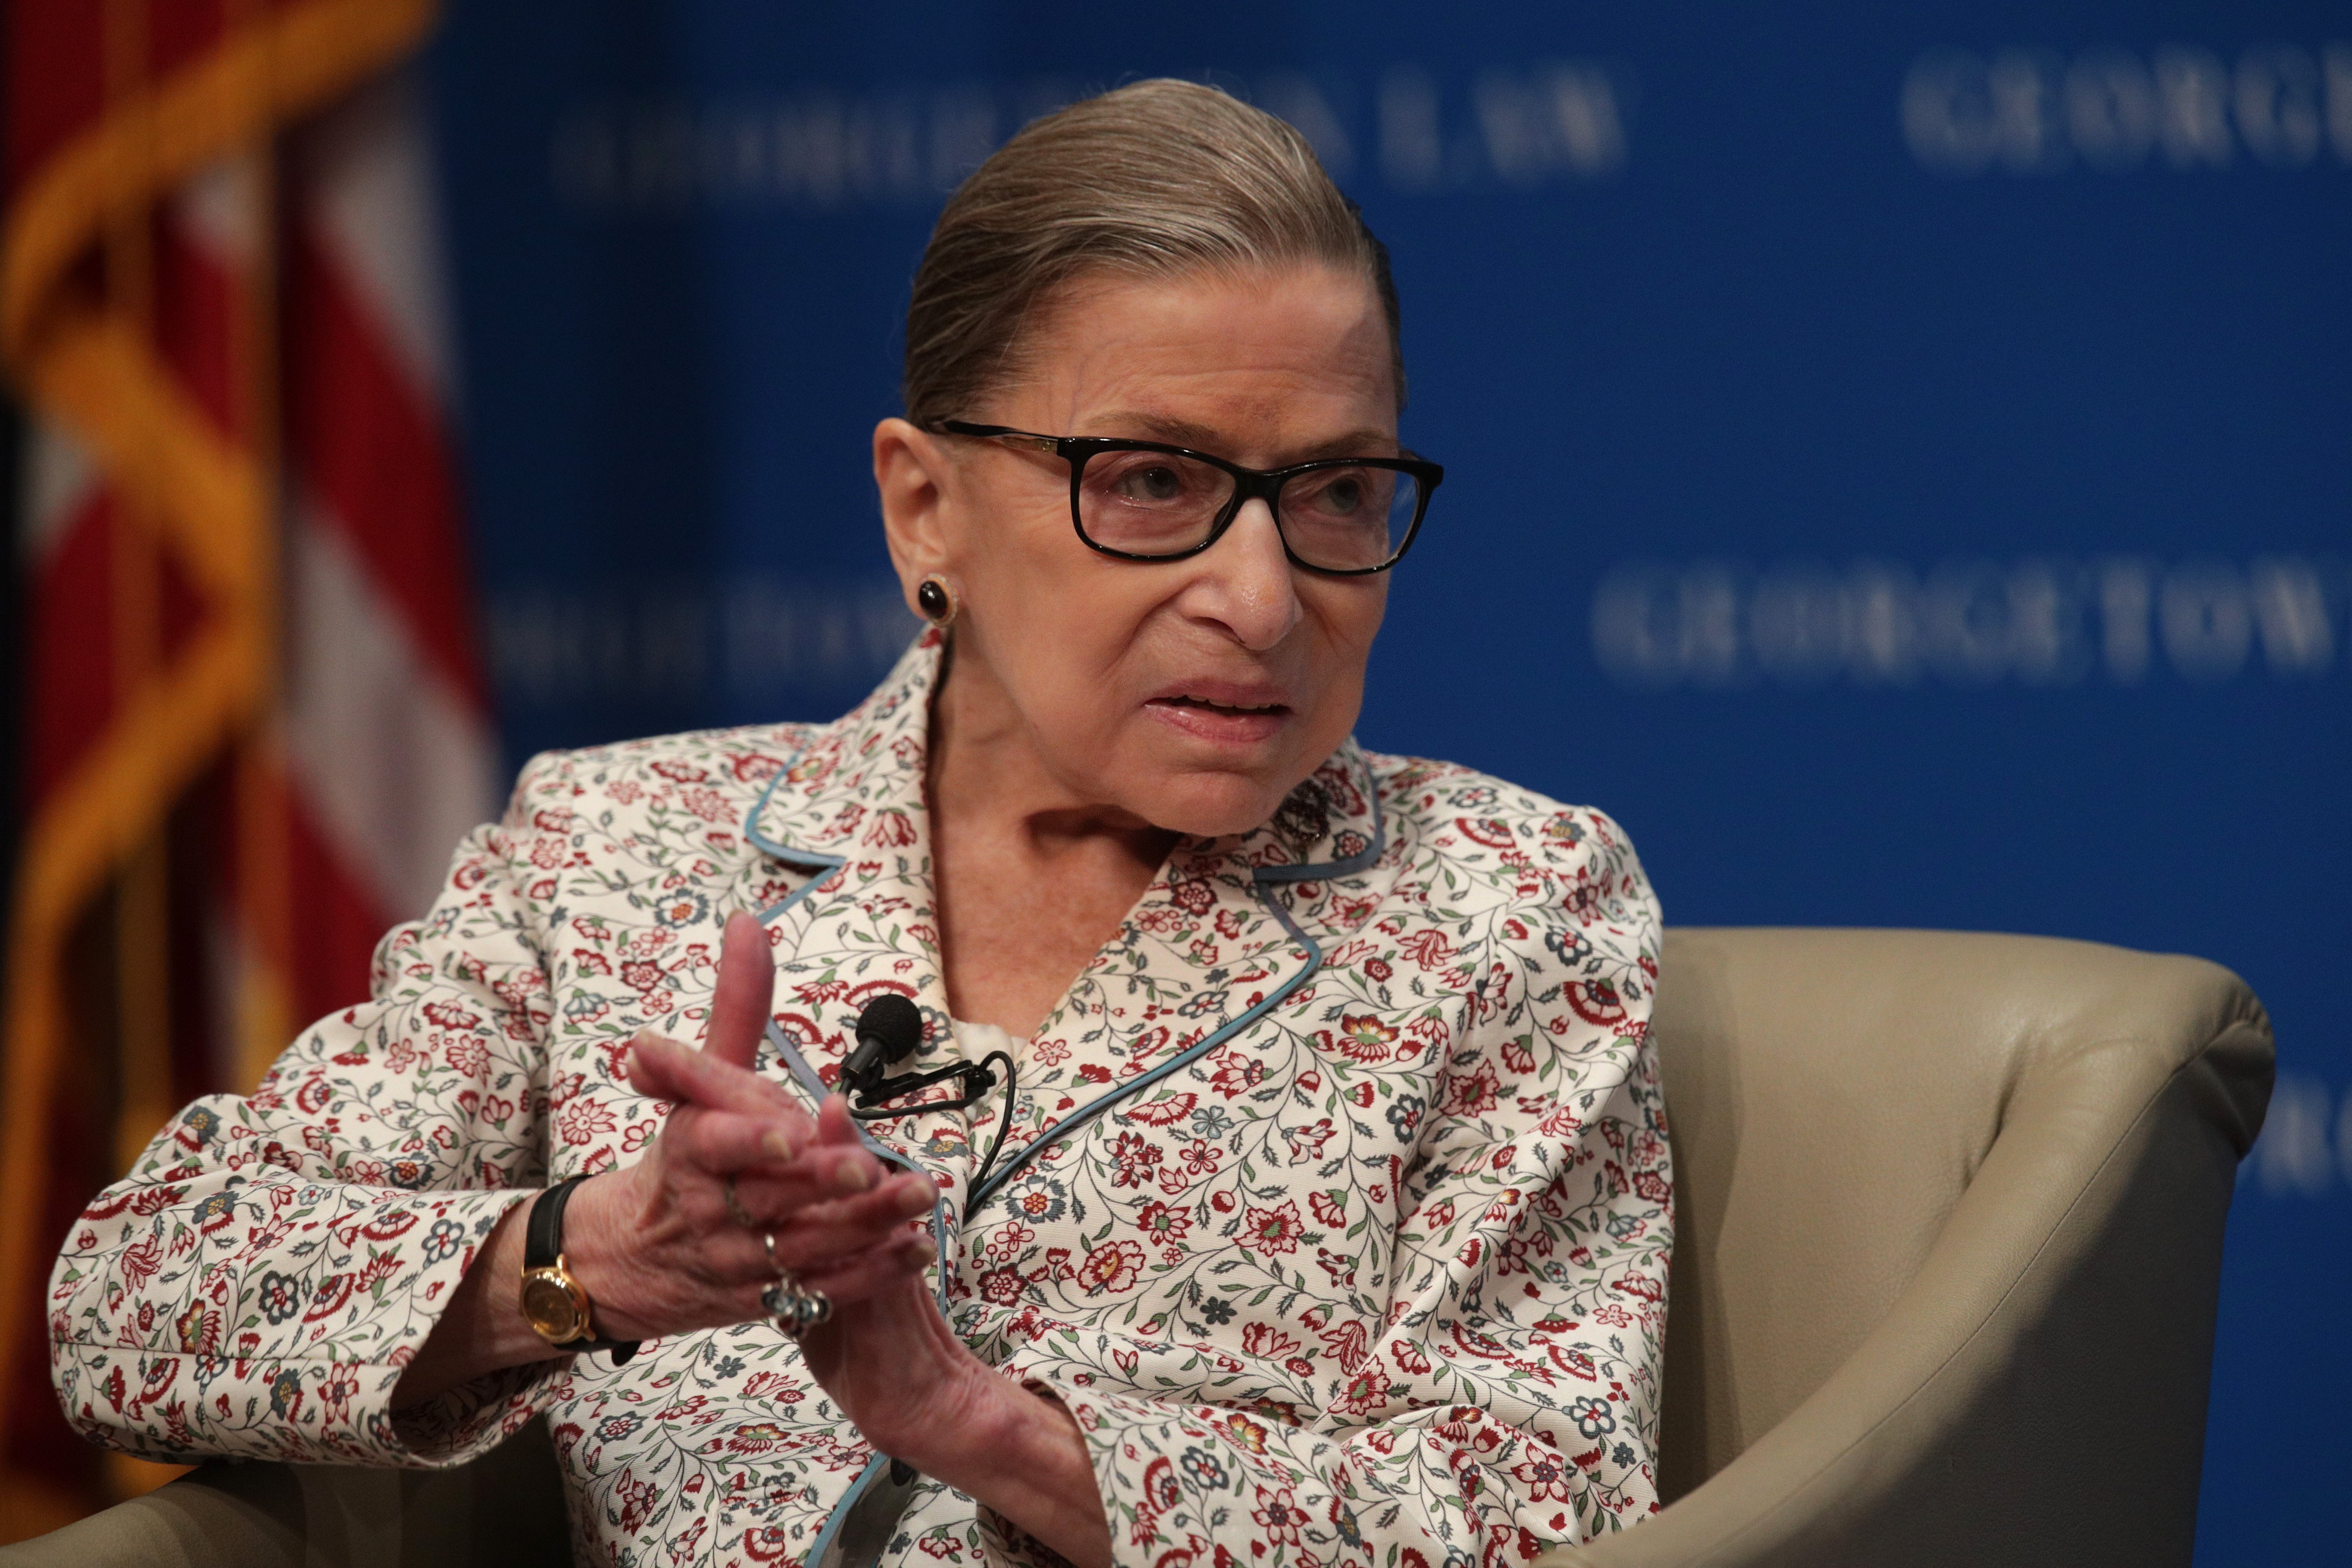 Supreme Court Associate Justice Ruth Bader Ginsburg participates in a discussion at Georgetown University Law Center July 2, 2019 in Washington, DC | Photo: GettyImages